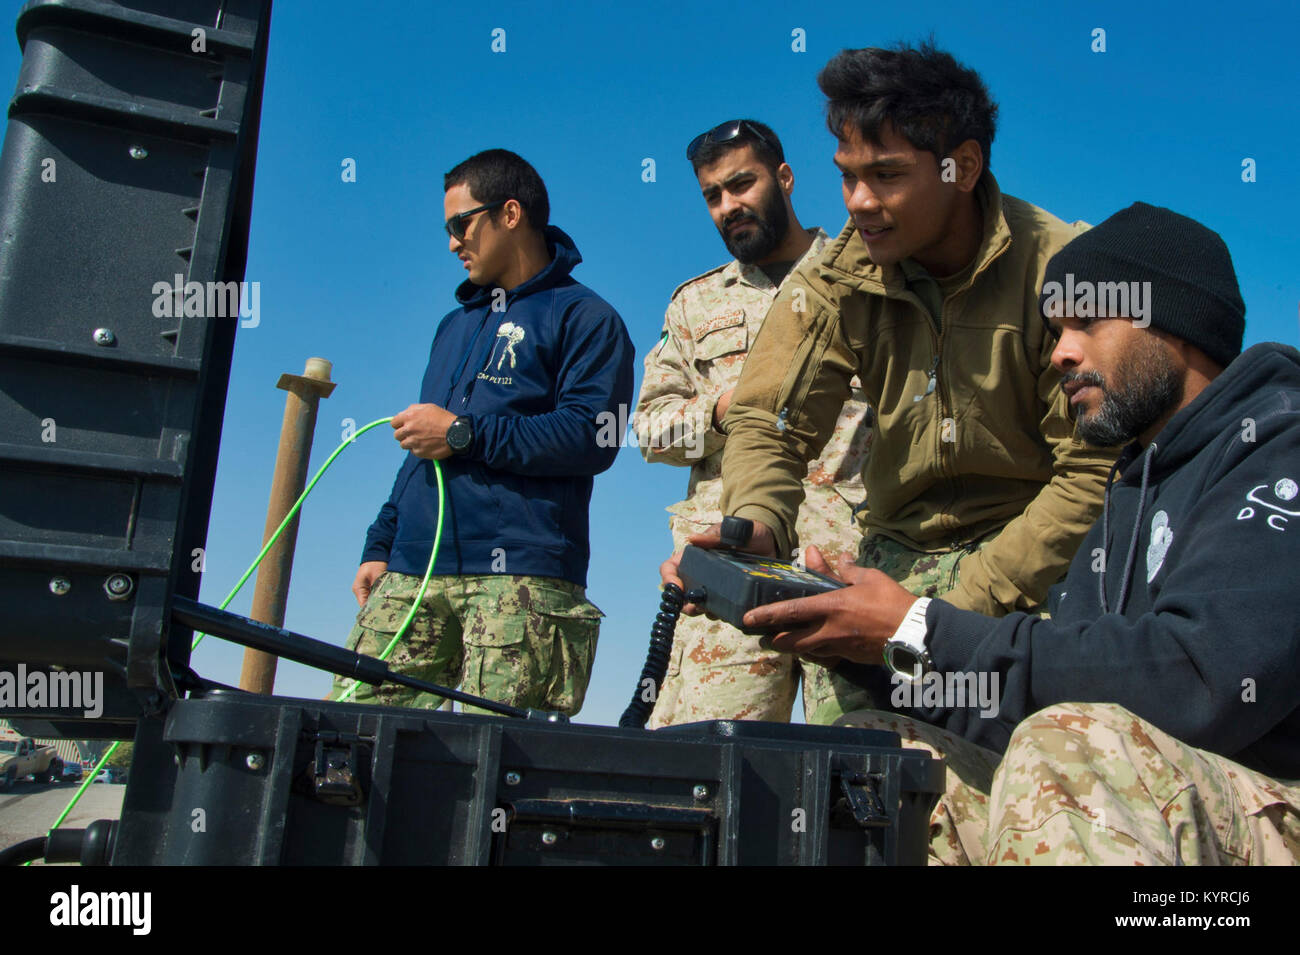 Mohammed Al-Ahmad Naval Base, KUWAIT (Jan. 8, 2018) Explosive Ordnance Disposal Technician 2nd Class Veranio Xavier Tongson, second from right, assigned to Commander, Task Group 56.1, provides hands-on training on a remotely operated vehicle with a Kuwait Naval Force explosive ordnance disposal technician during a training evolution as part of exercise Eager Response 18. Eager Response 18 is a bilateral explosive ordnance disposal military exercise between the State of Kuwait and the United States. The exercise fortifies military-to-military relationships between the Kuwait Naval Force and U.S Stock Photo